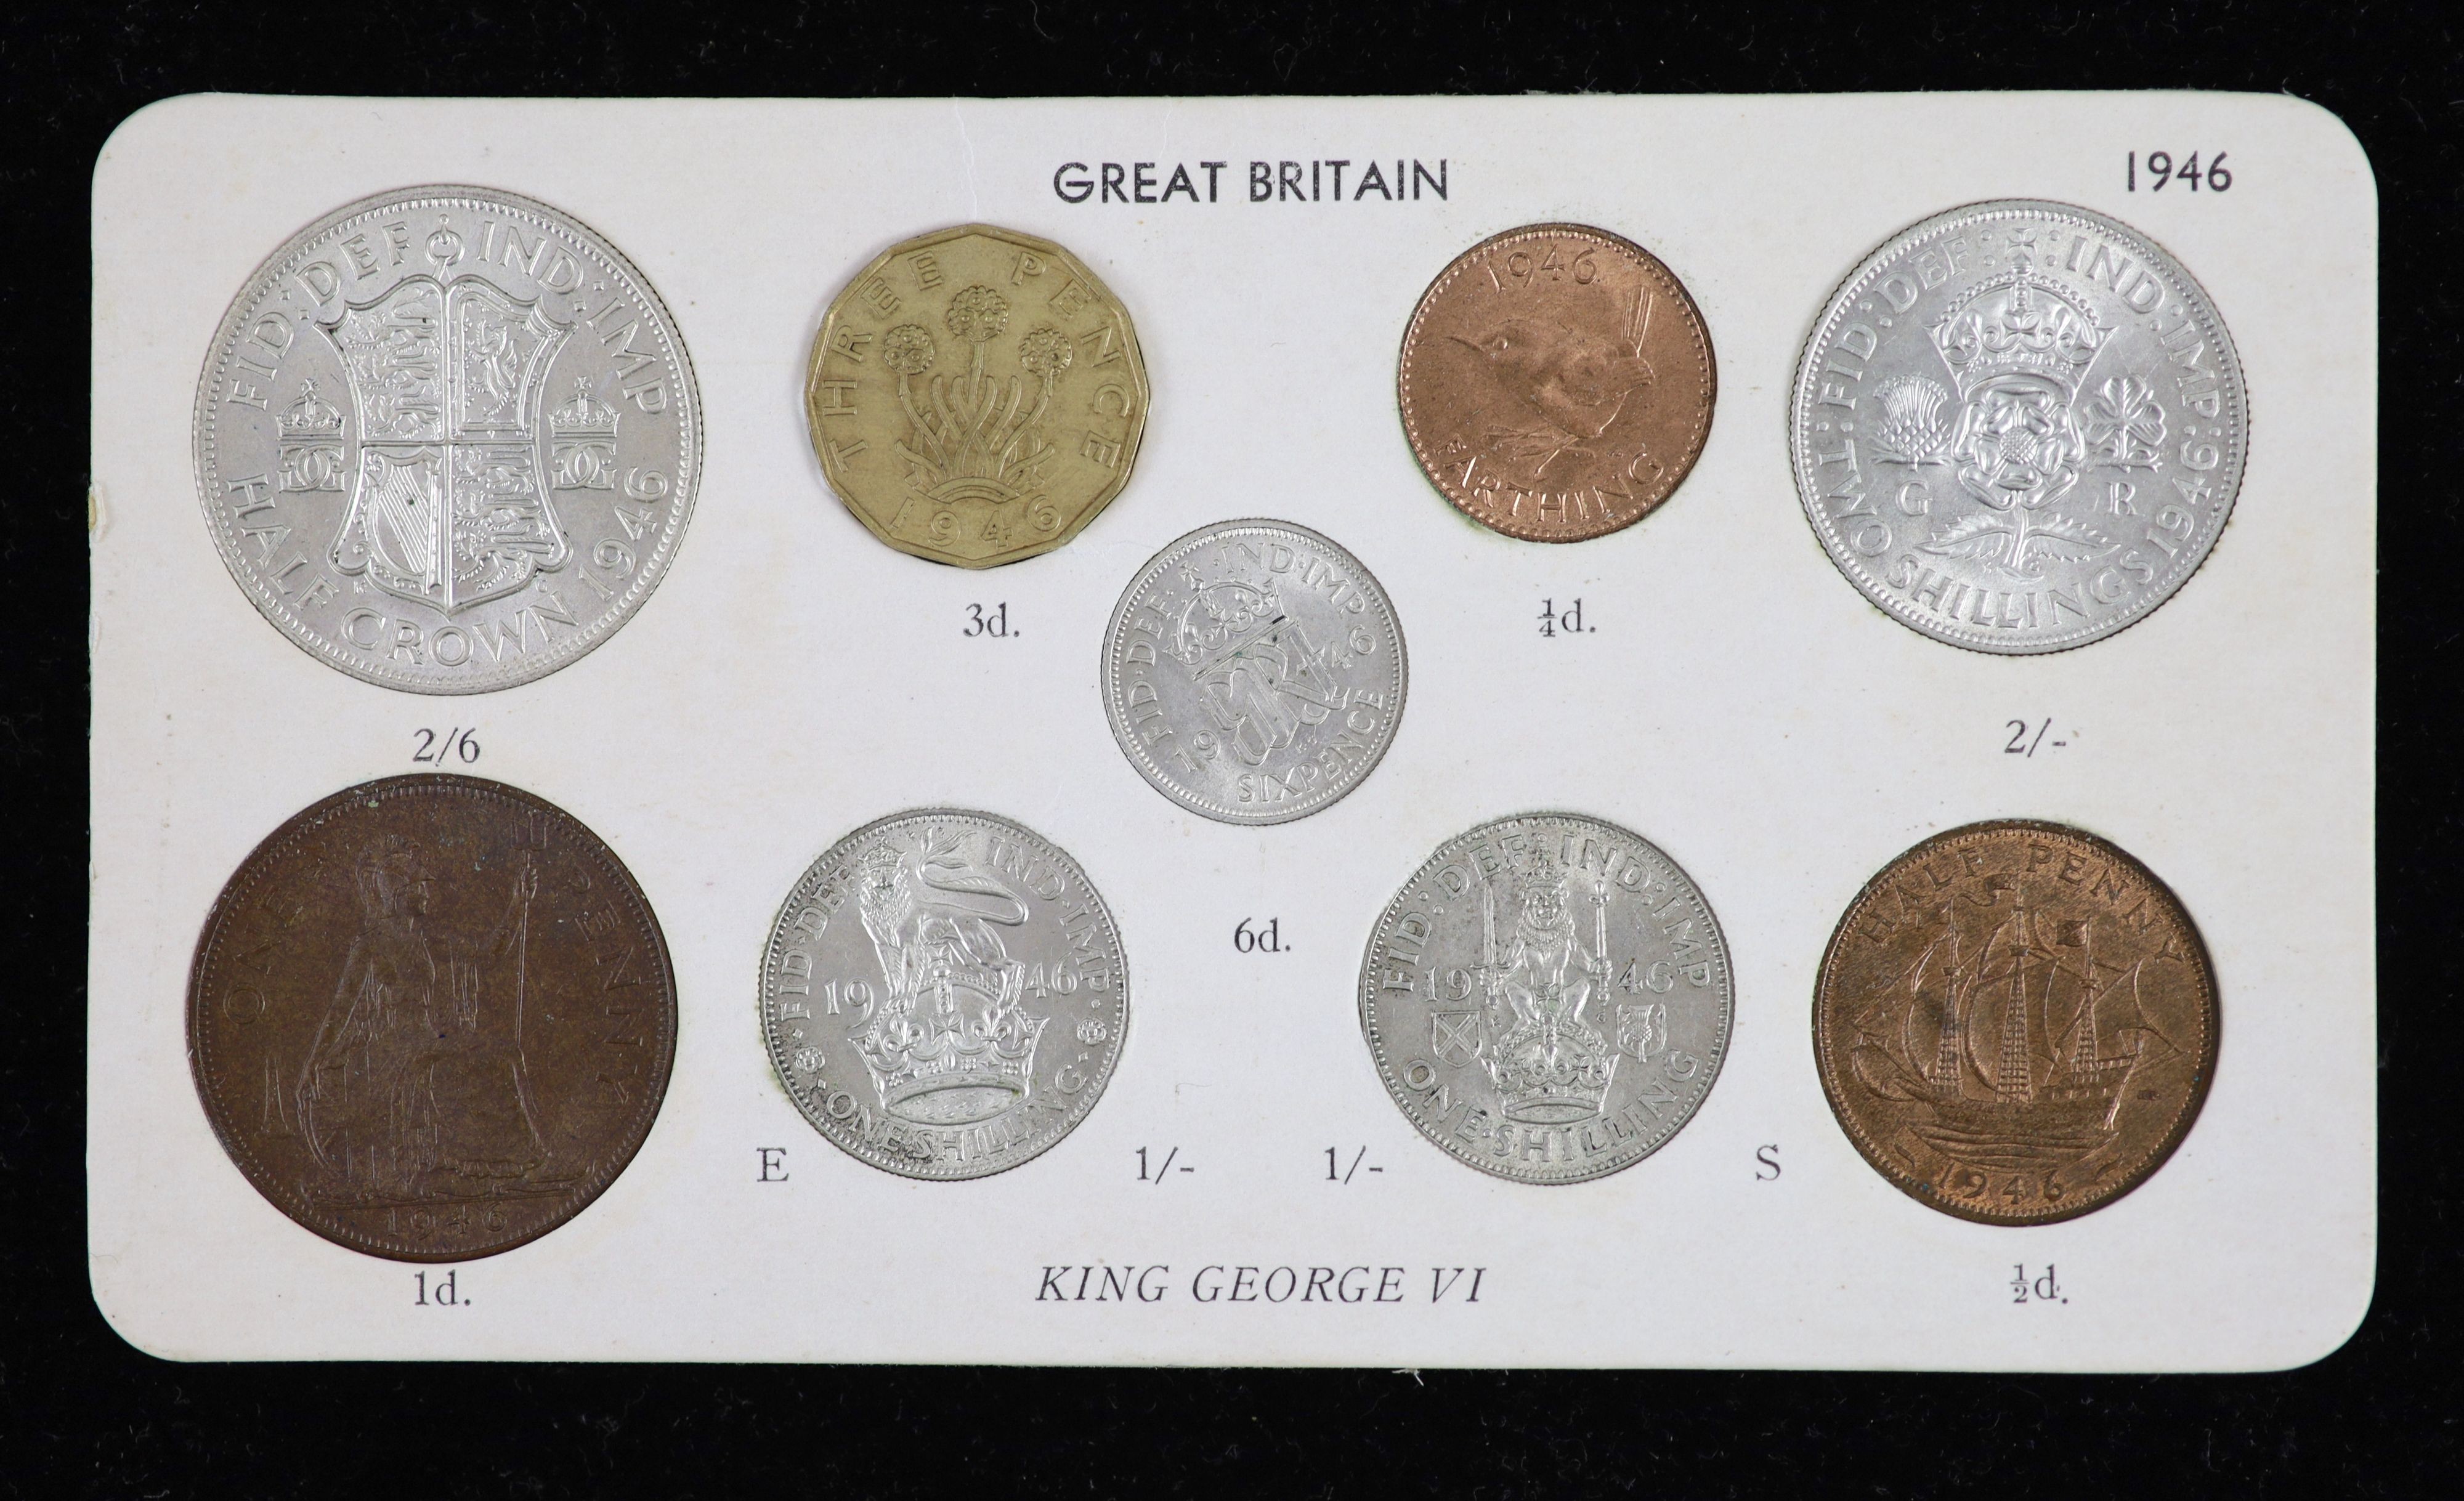 George VI nine coin specimen set for 1946, first issue, including the rare 1946 brass threepence (S4112), about EF, rare in this grade or higher